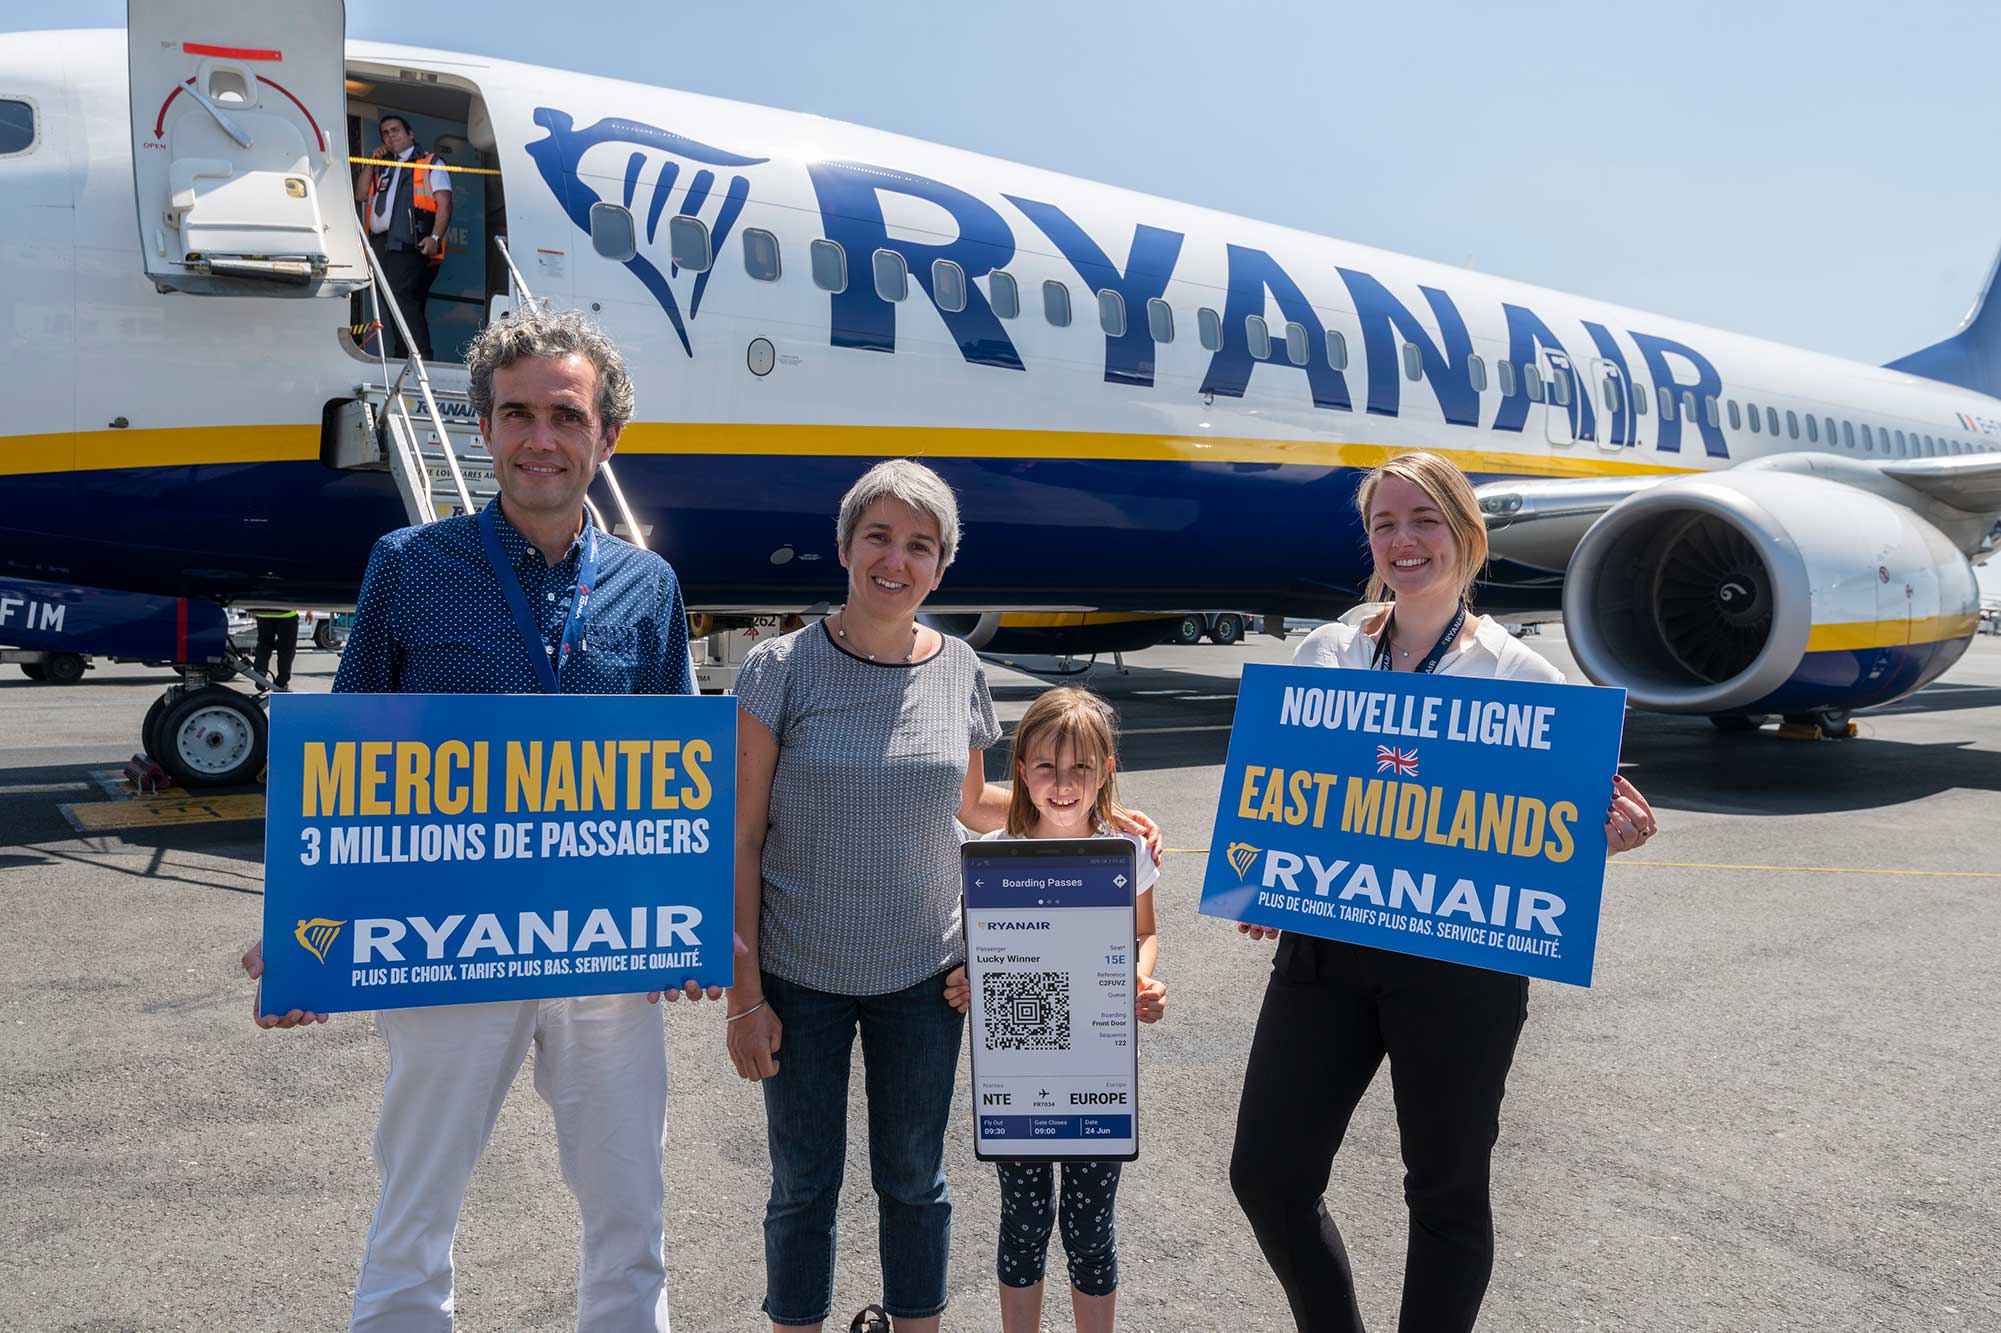 Ryanair Celebrates 3m Passengers In Nantes First Flight To East Midlands Takes Off